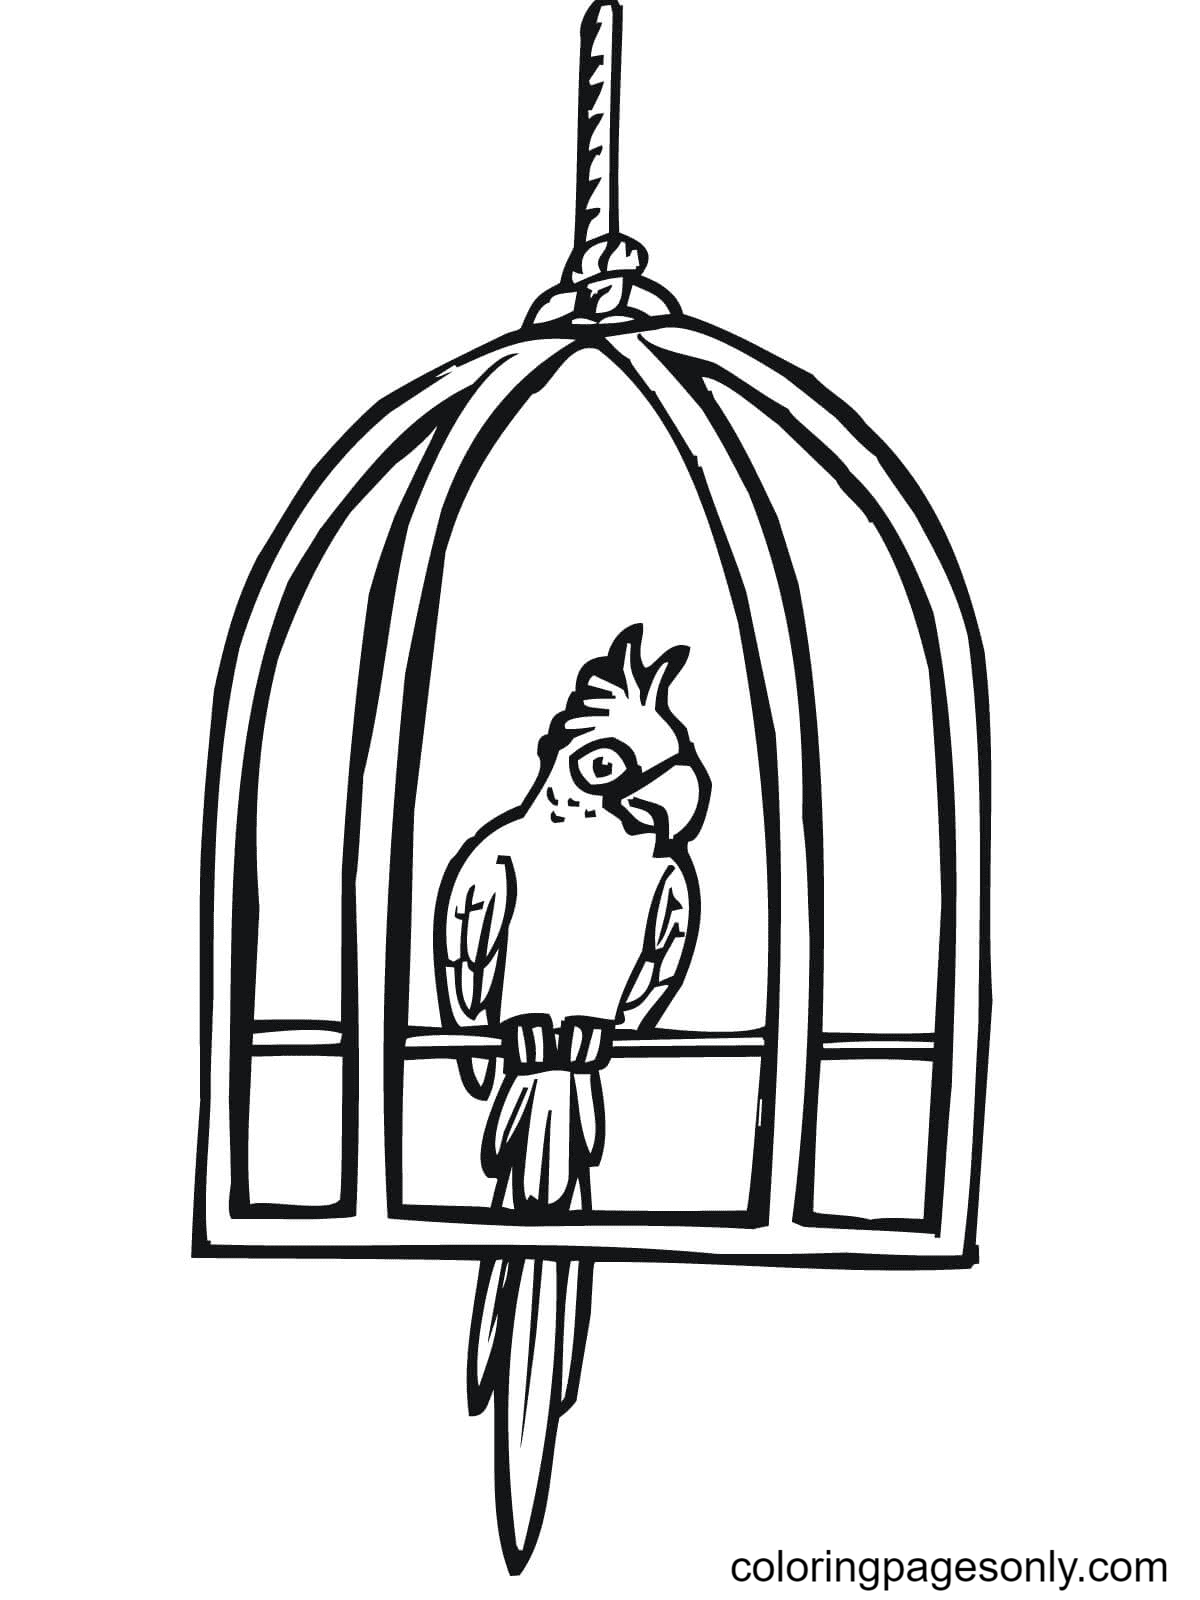 Parrot in a Cage Coloring Page